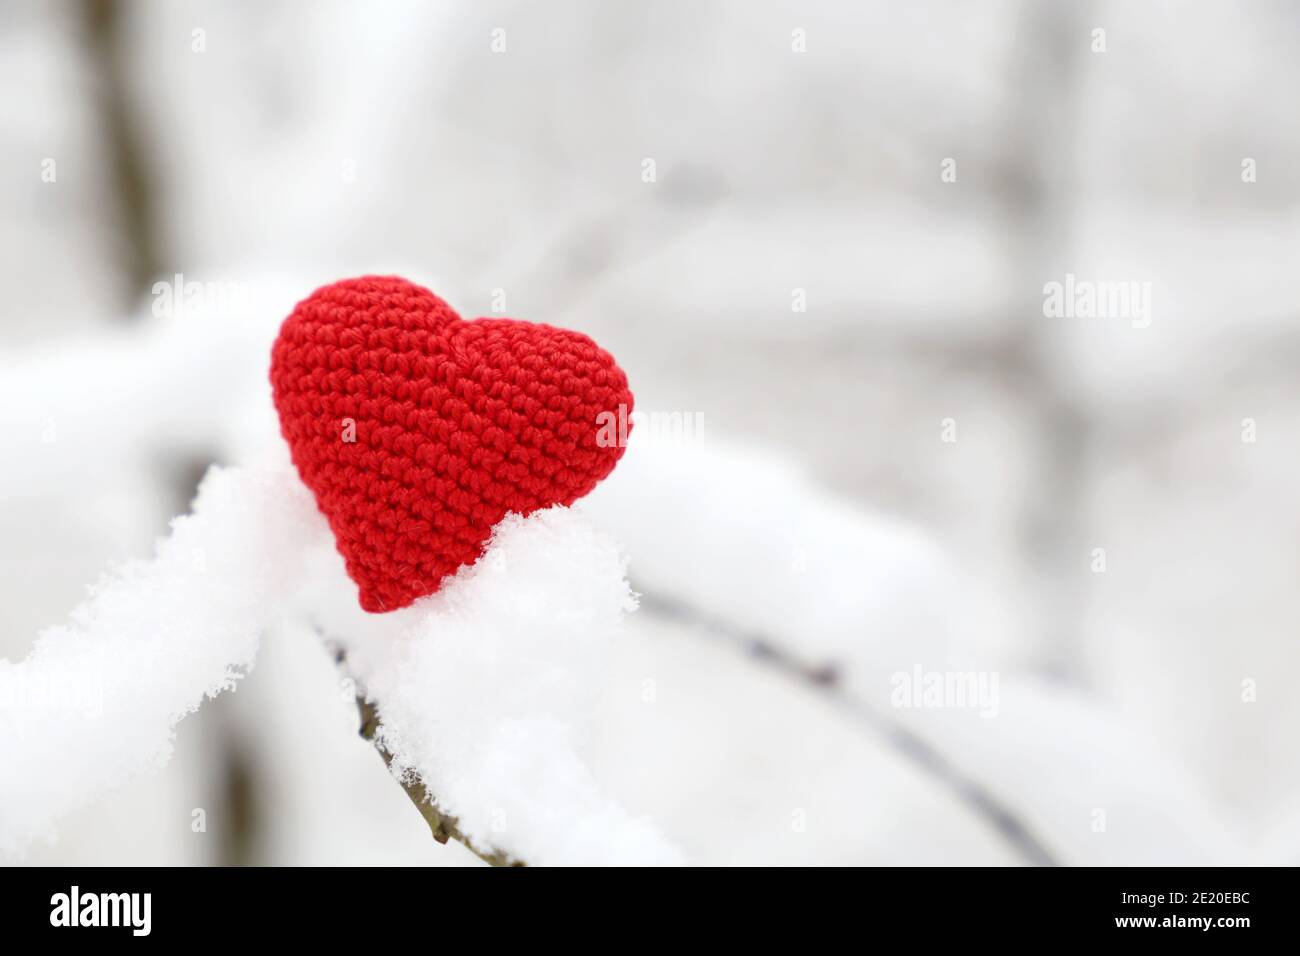 Valentine heart in winter forest, cold weather. Red knitted heart on snow covered branch, symbol of romantic love, background for holiday Stock Photo